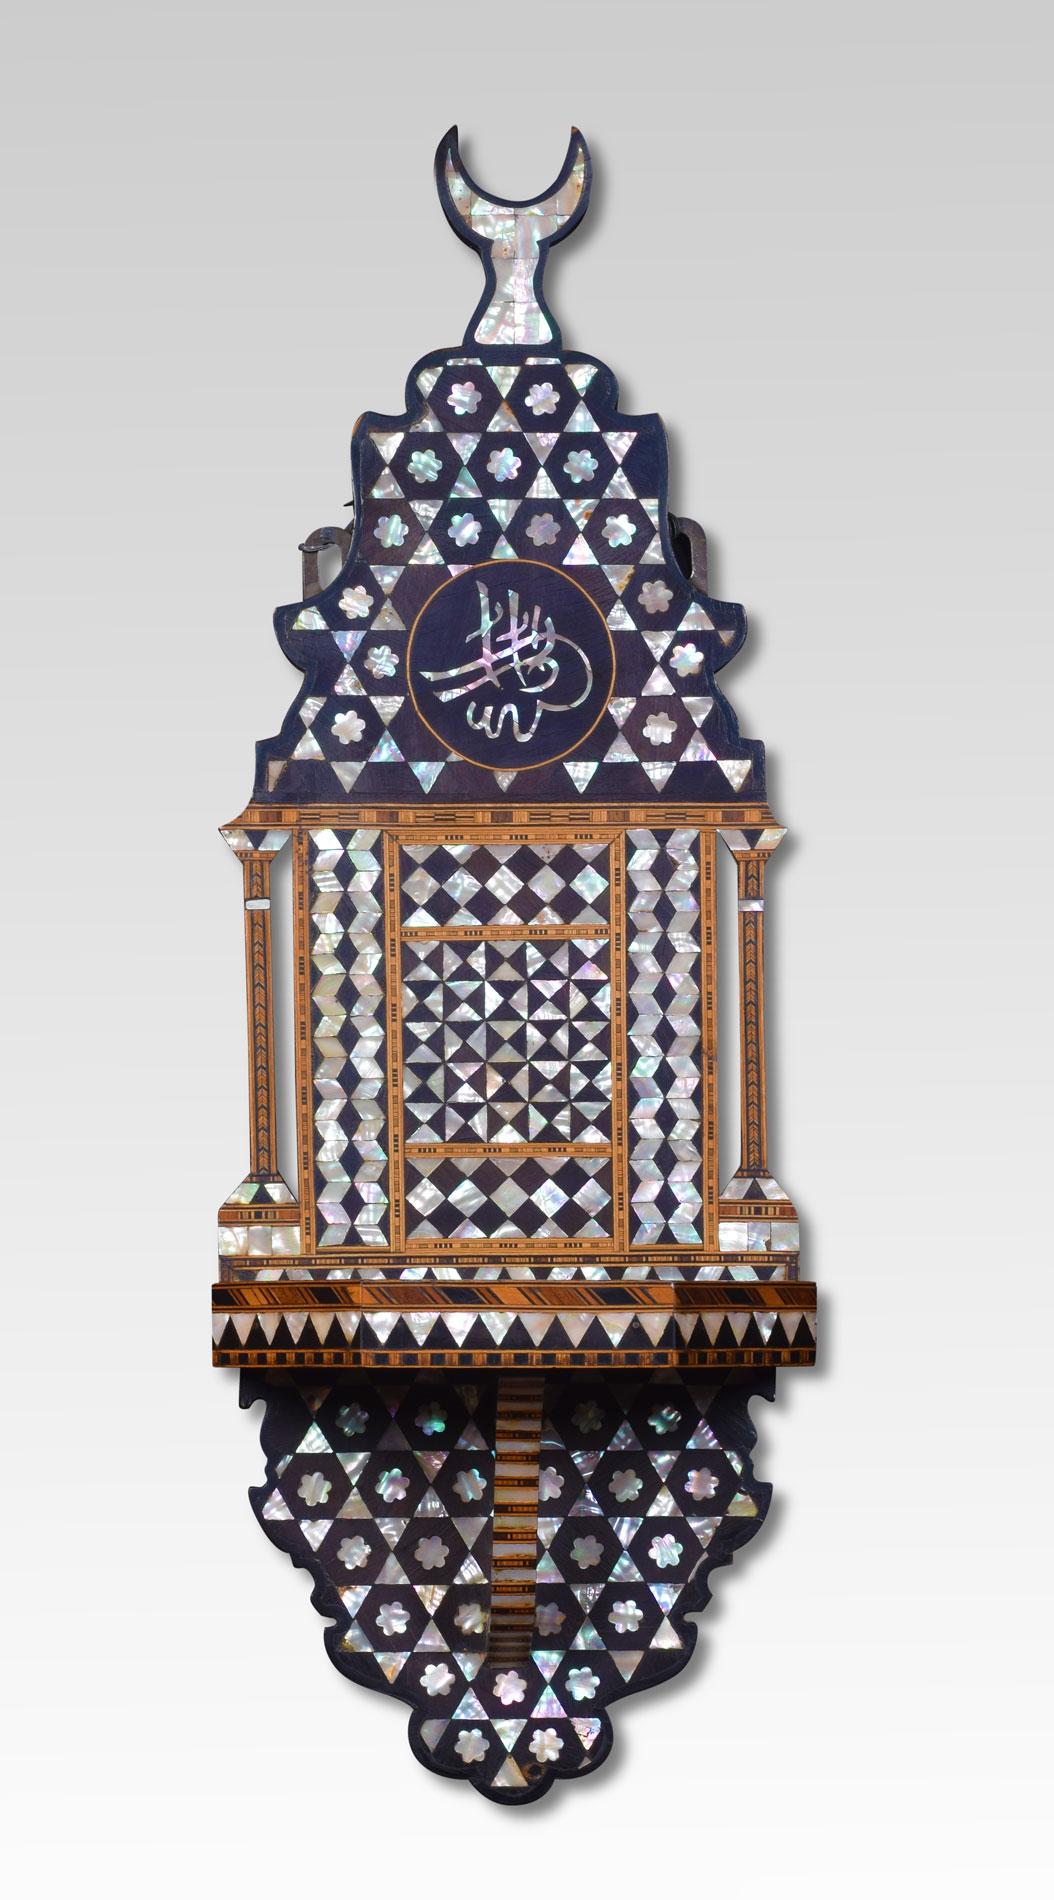 Near pair of Moorish wall brackets expertly crafted with geometric inlays of mother of pearl, bone, and exotic hardwoods.
Dimensions:
Height 24 inches
Width 8.5 inches
Depth 5.5 inches.